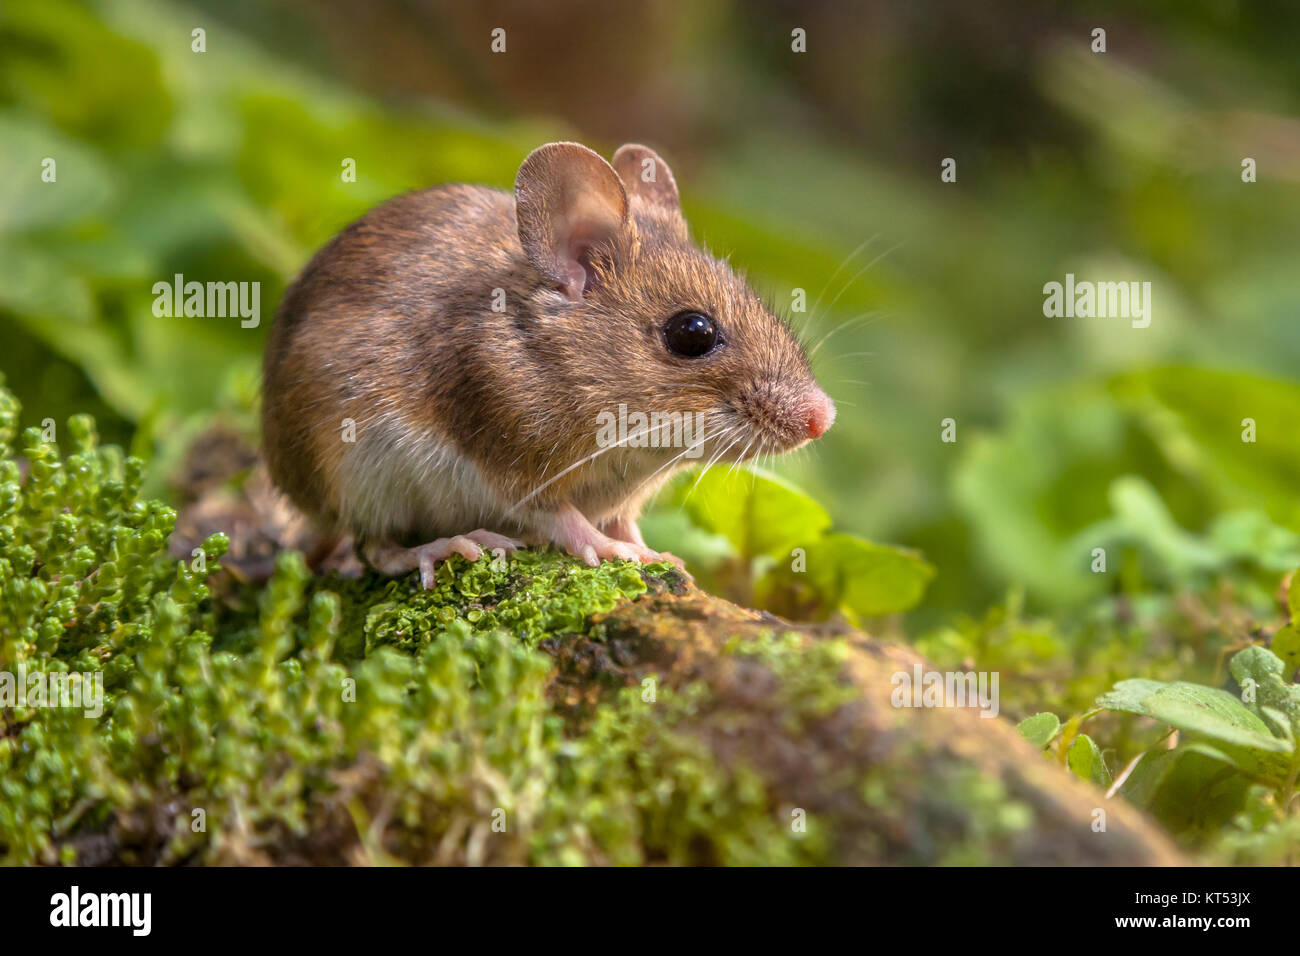 Cute Wild Wood mouse resting on a stick on the forest floor with lush green vegetation Stock Photo